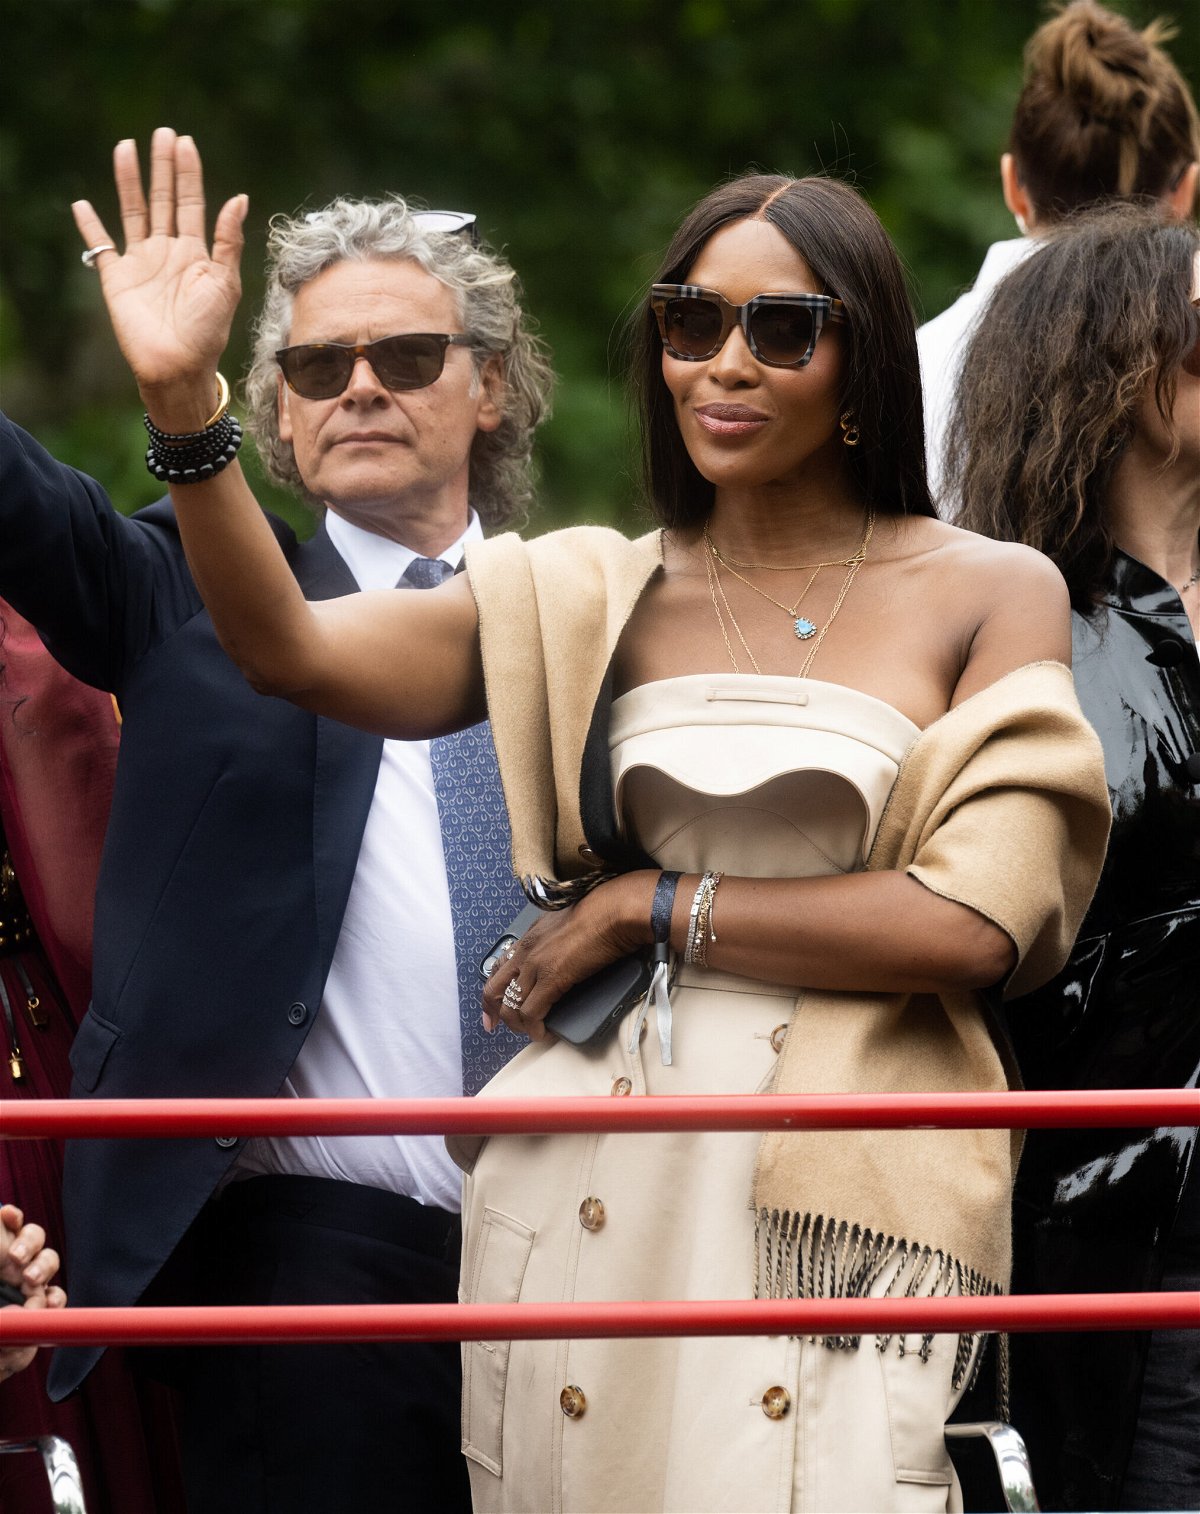 <i>Samir Hussein/WireImage</i><br/>Supermodel Naomi Campbell waved to her adoring public atop one of the pageant parade floats